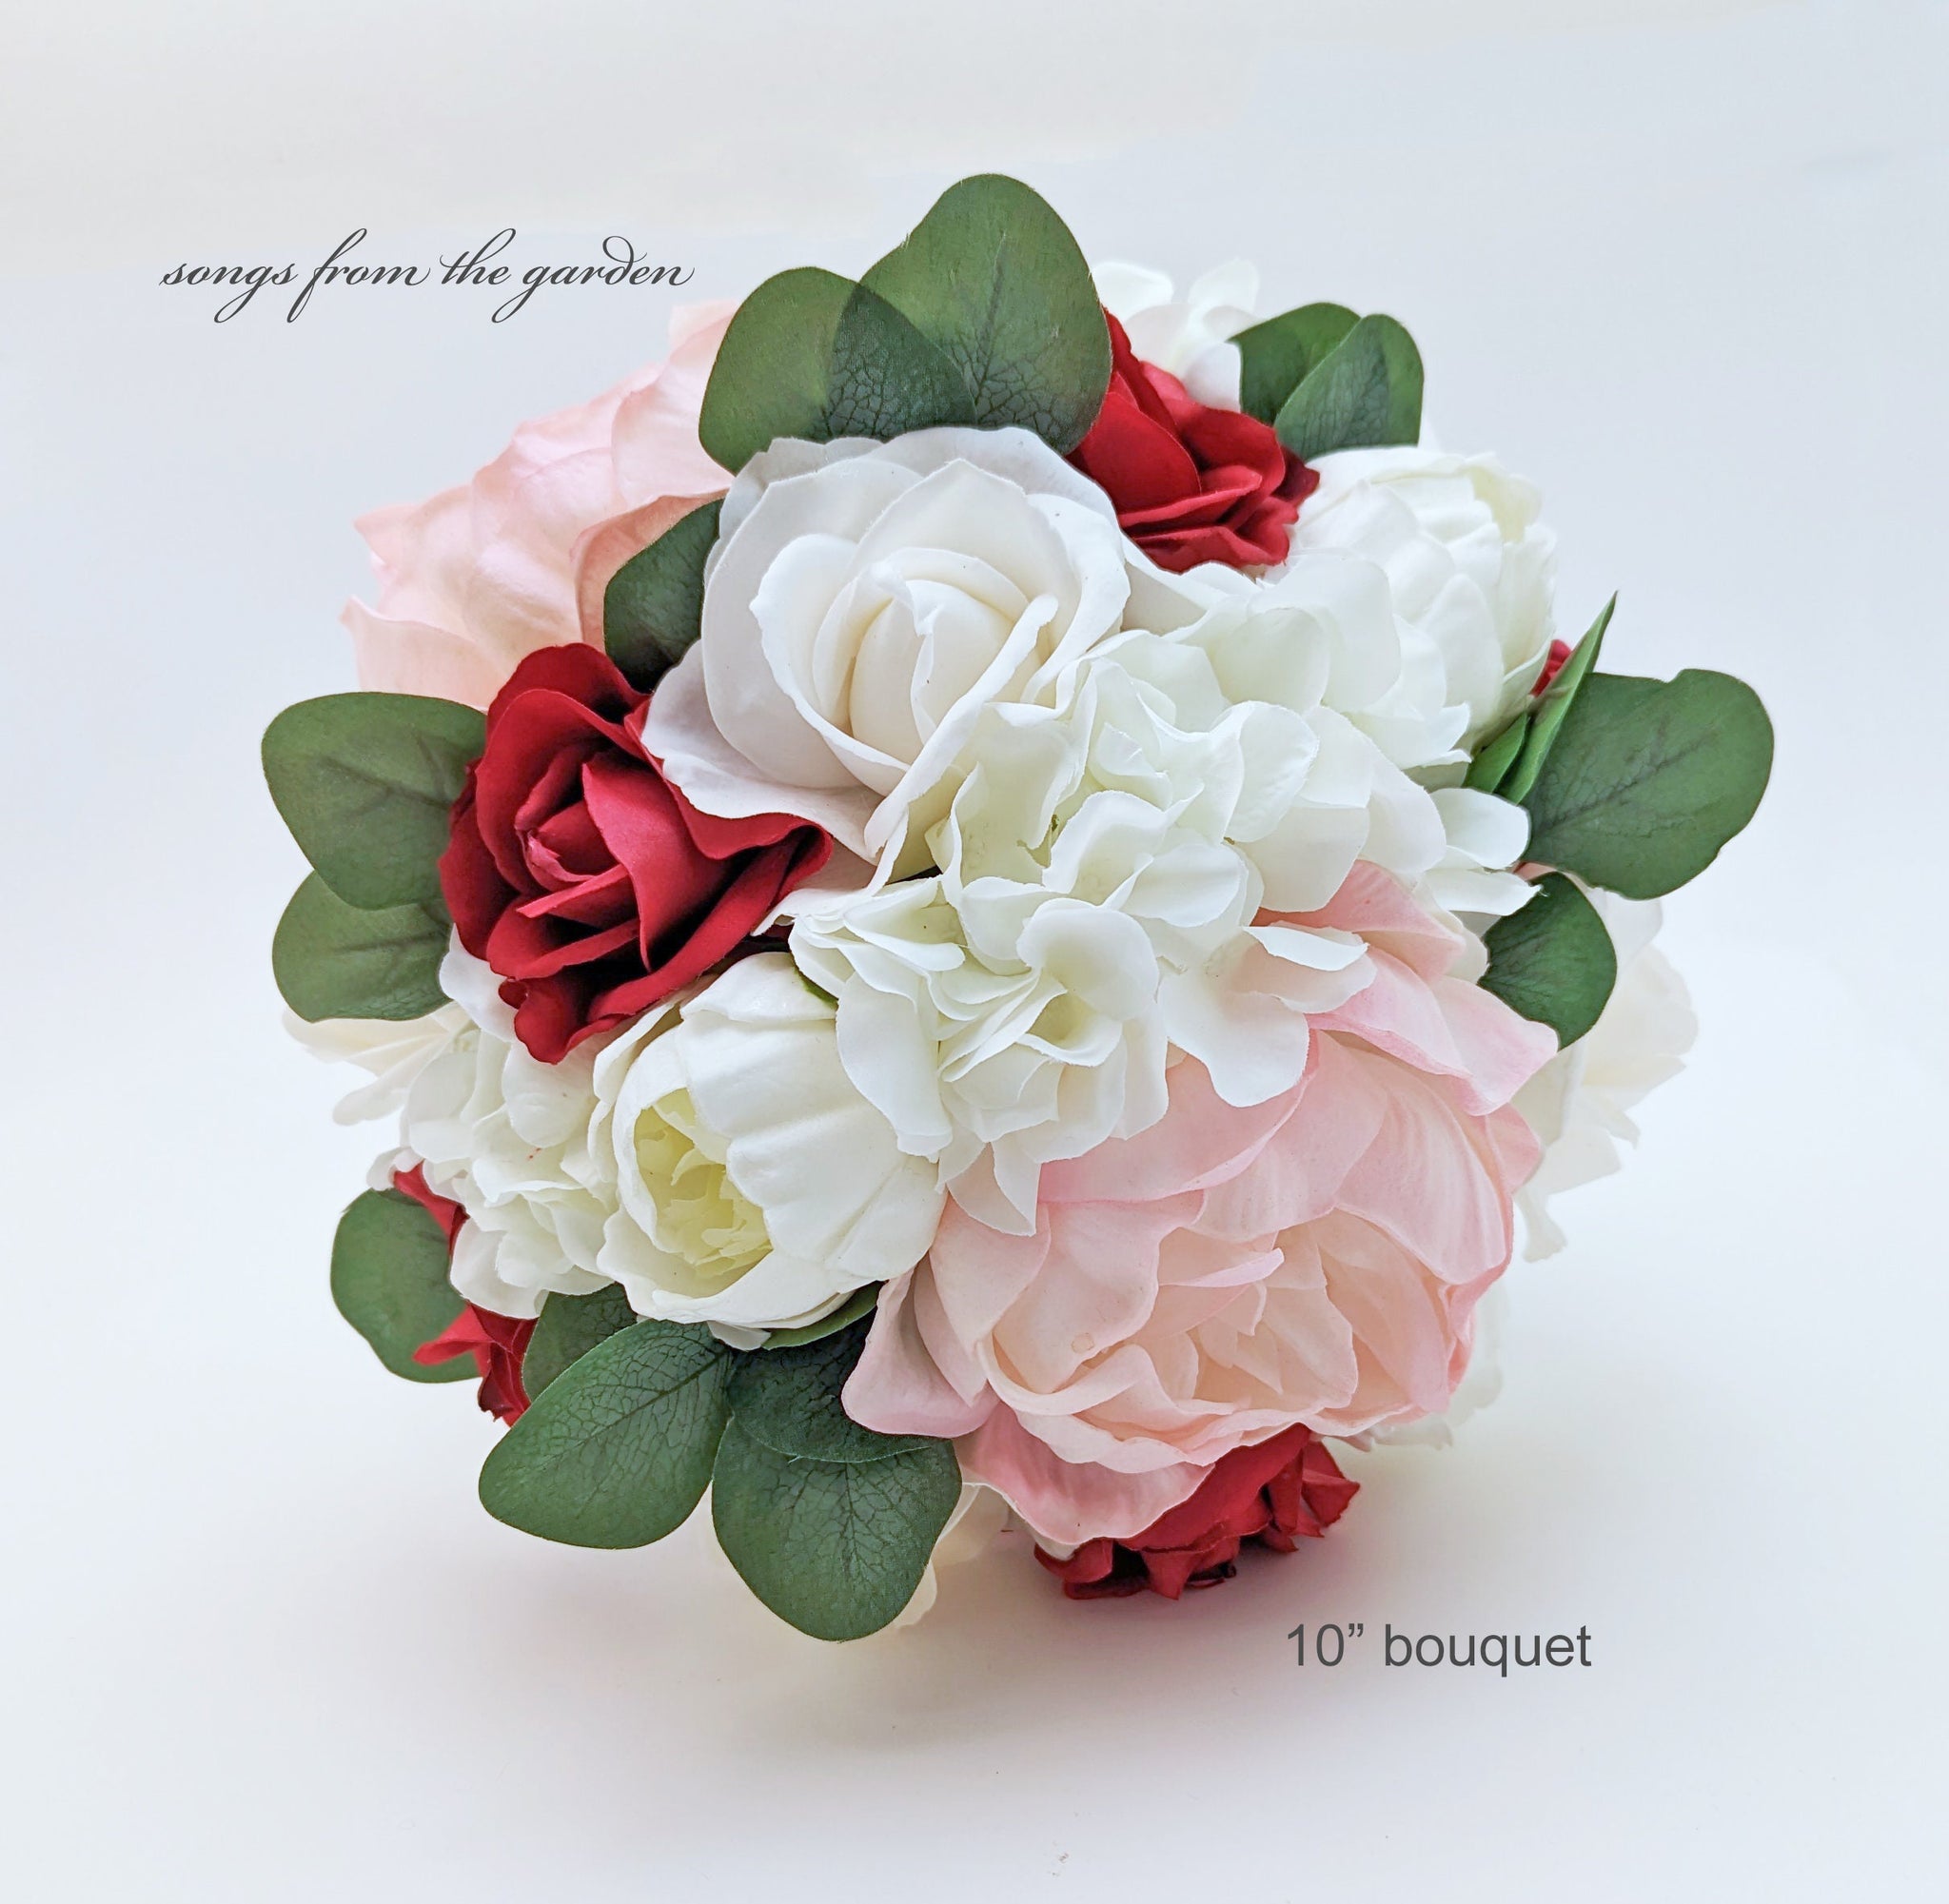 Blush Red Bridal or Bridesmaid Bouquet Eucalyptus Peonies Roses - Add Groom's Boutonniere Corsage Wedding Centerpiece Crown & More!